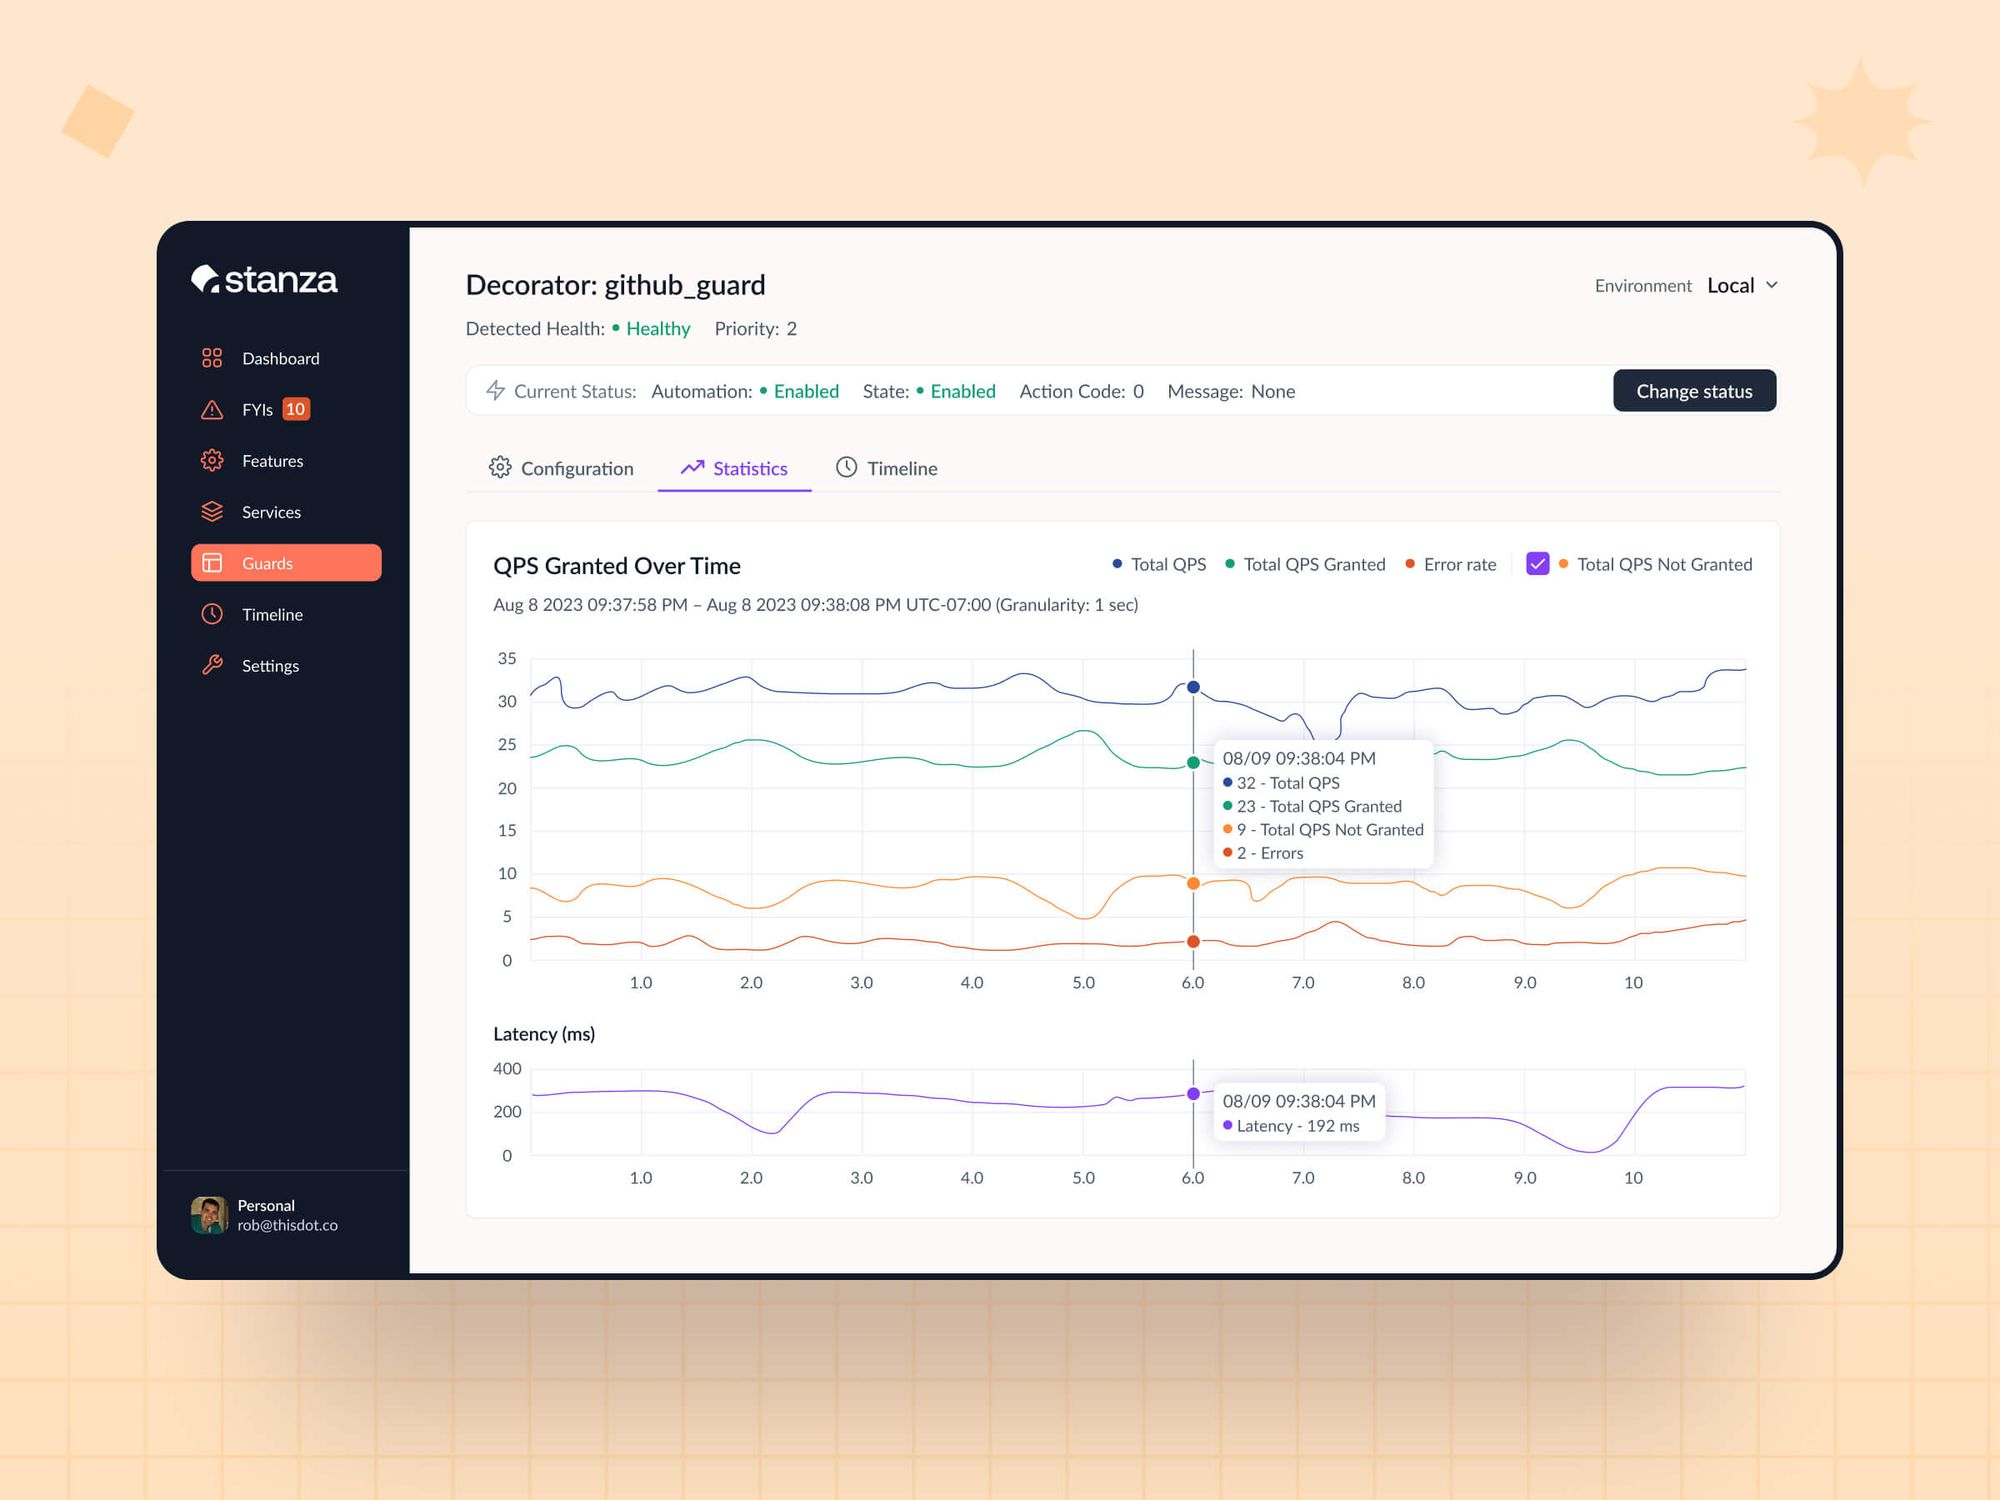 Dashboard interface with details for the "github guard" decorator, including its health and priority, and graphs displaying QPS granted over time and latency